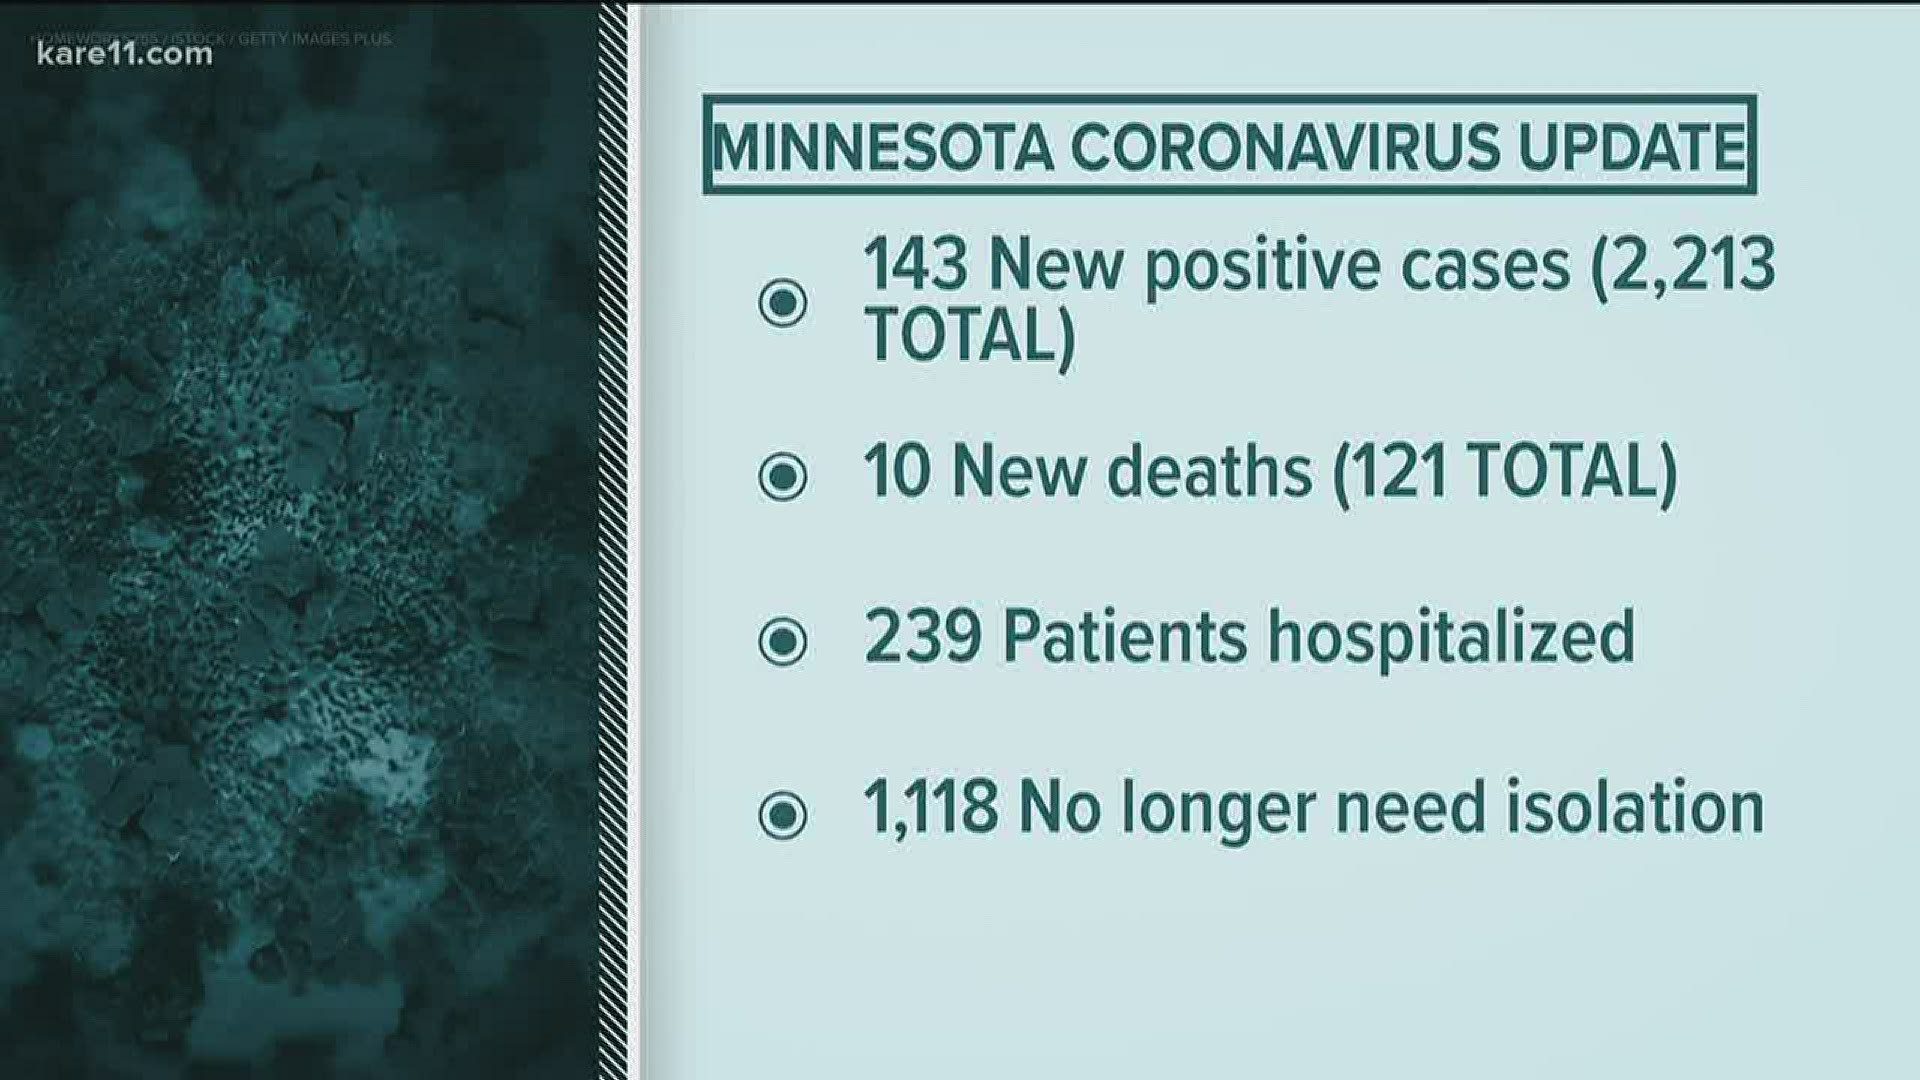 Here are the latest developments on the fight to stop the spread of COVID-19 in Minnesota.